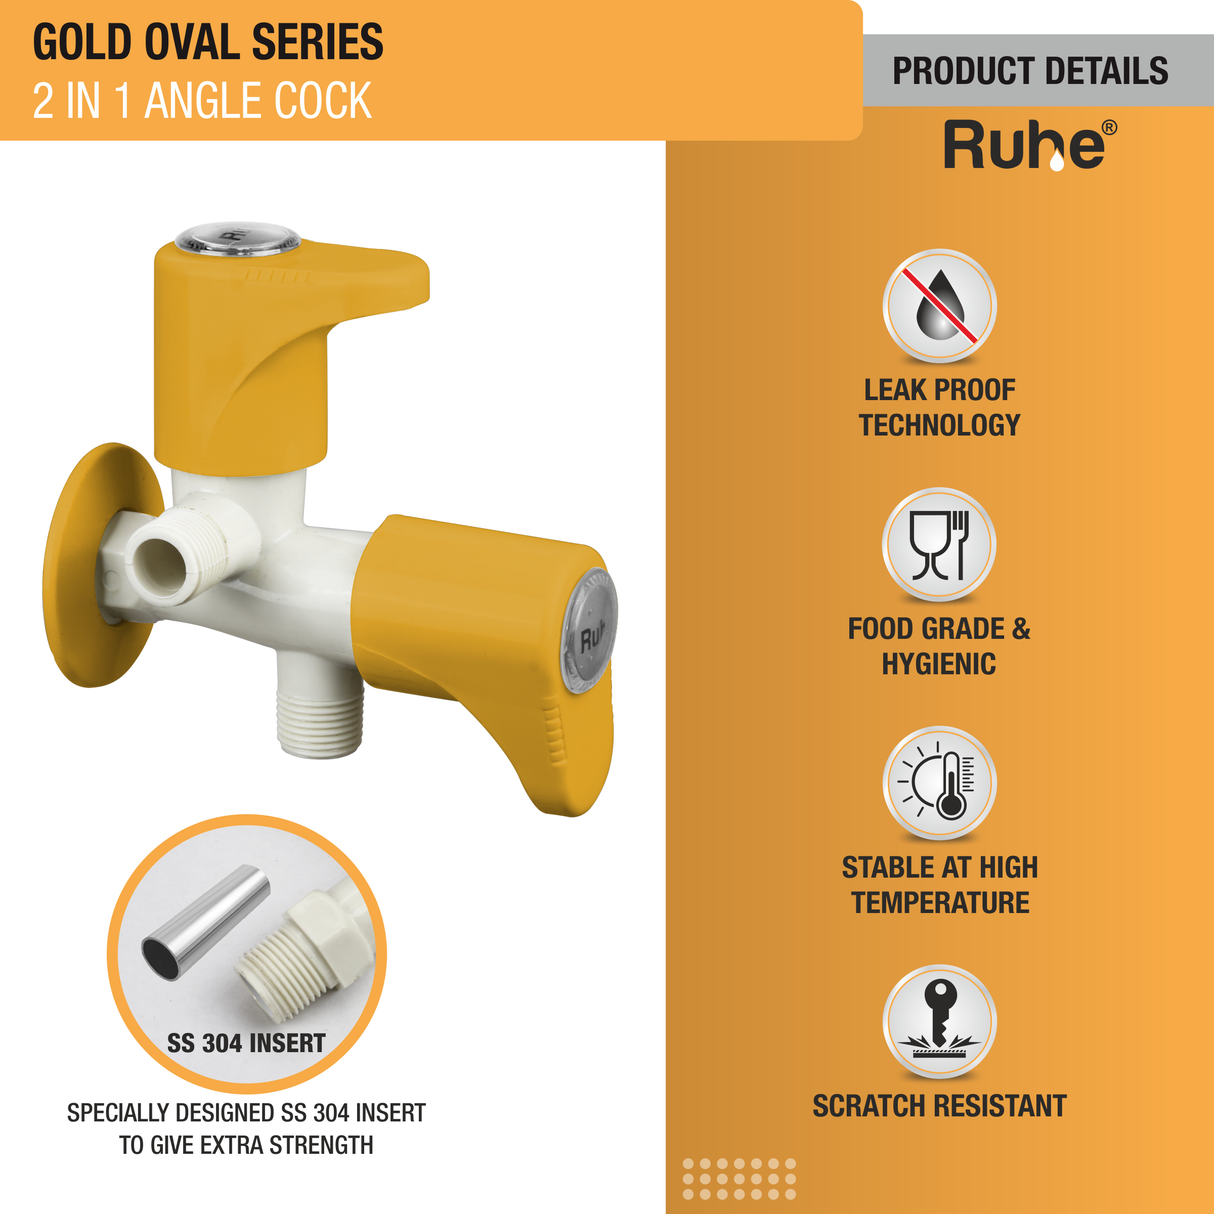 Gold Oval PTMT 2 in 1 Angle Cock Faucet details